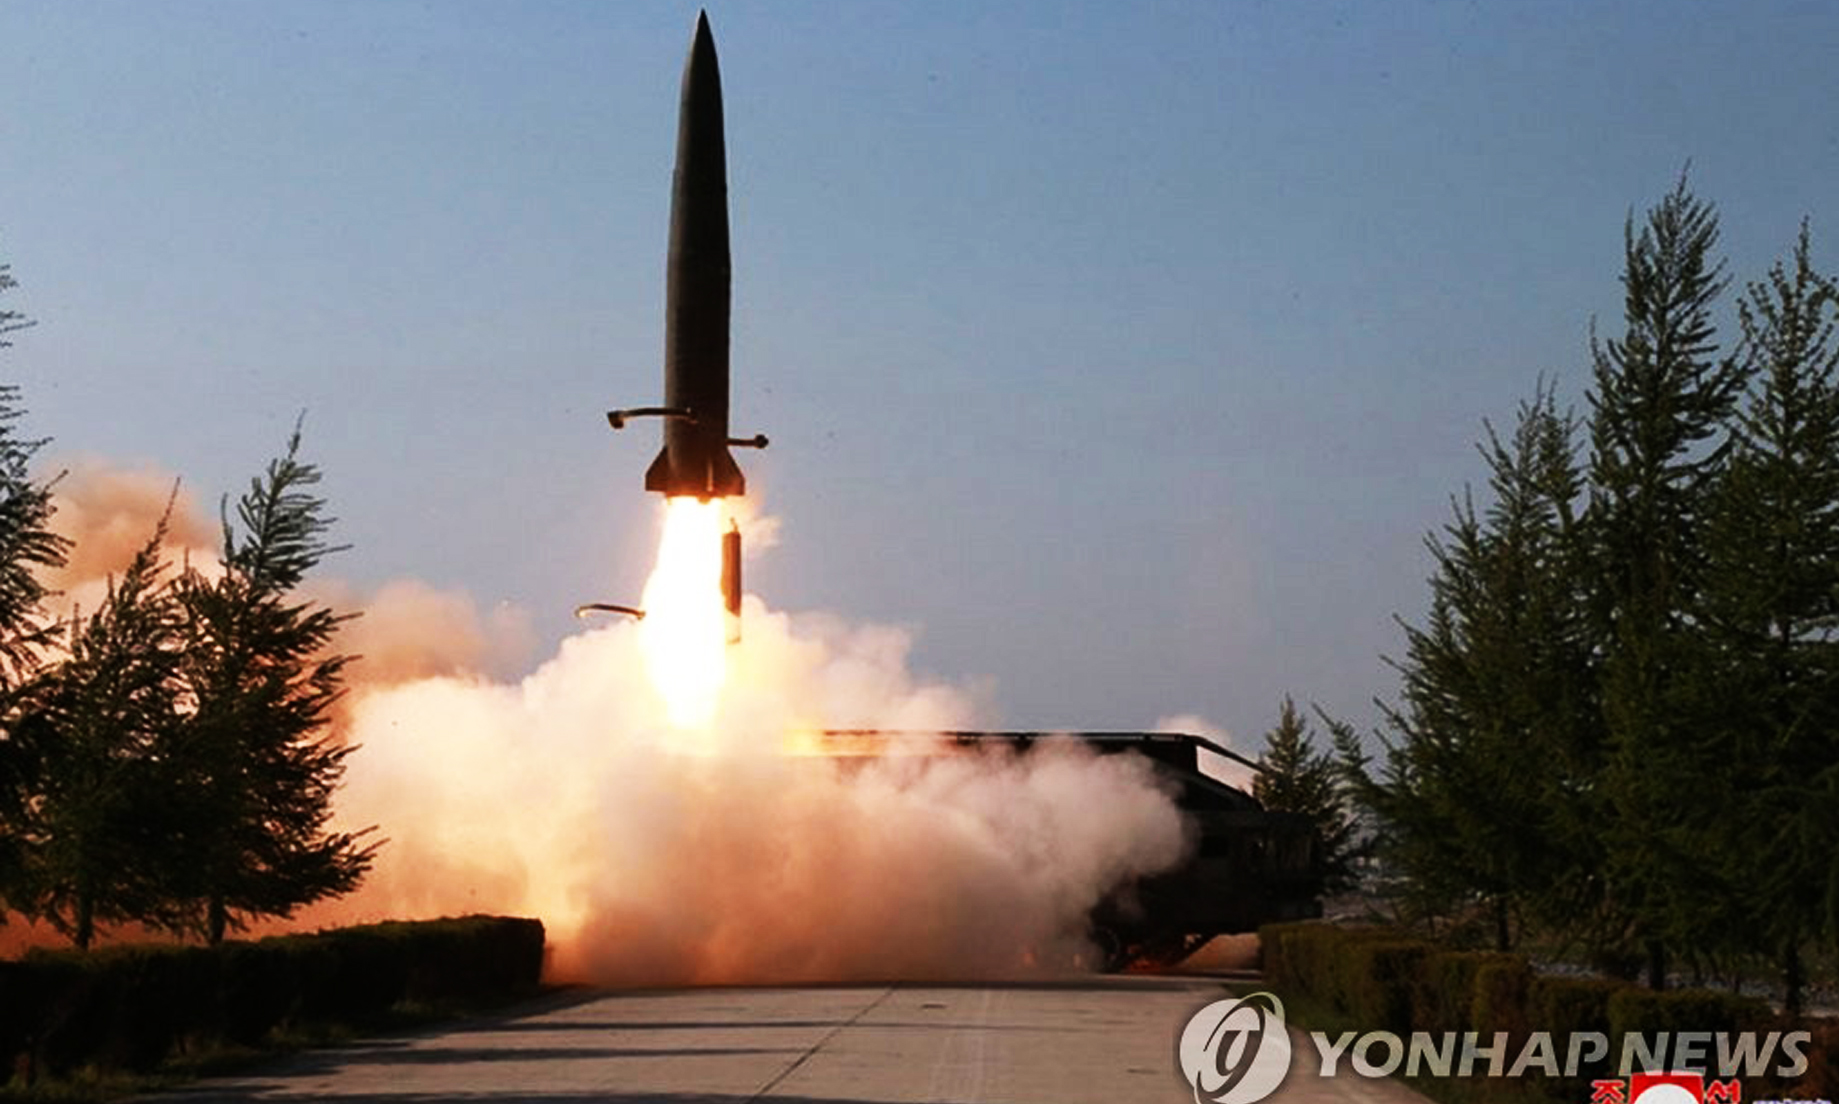 Top DPRK Leader Guides Test-Fire Of New Weapon Again